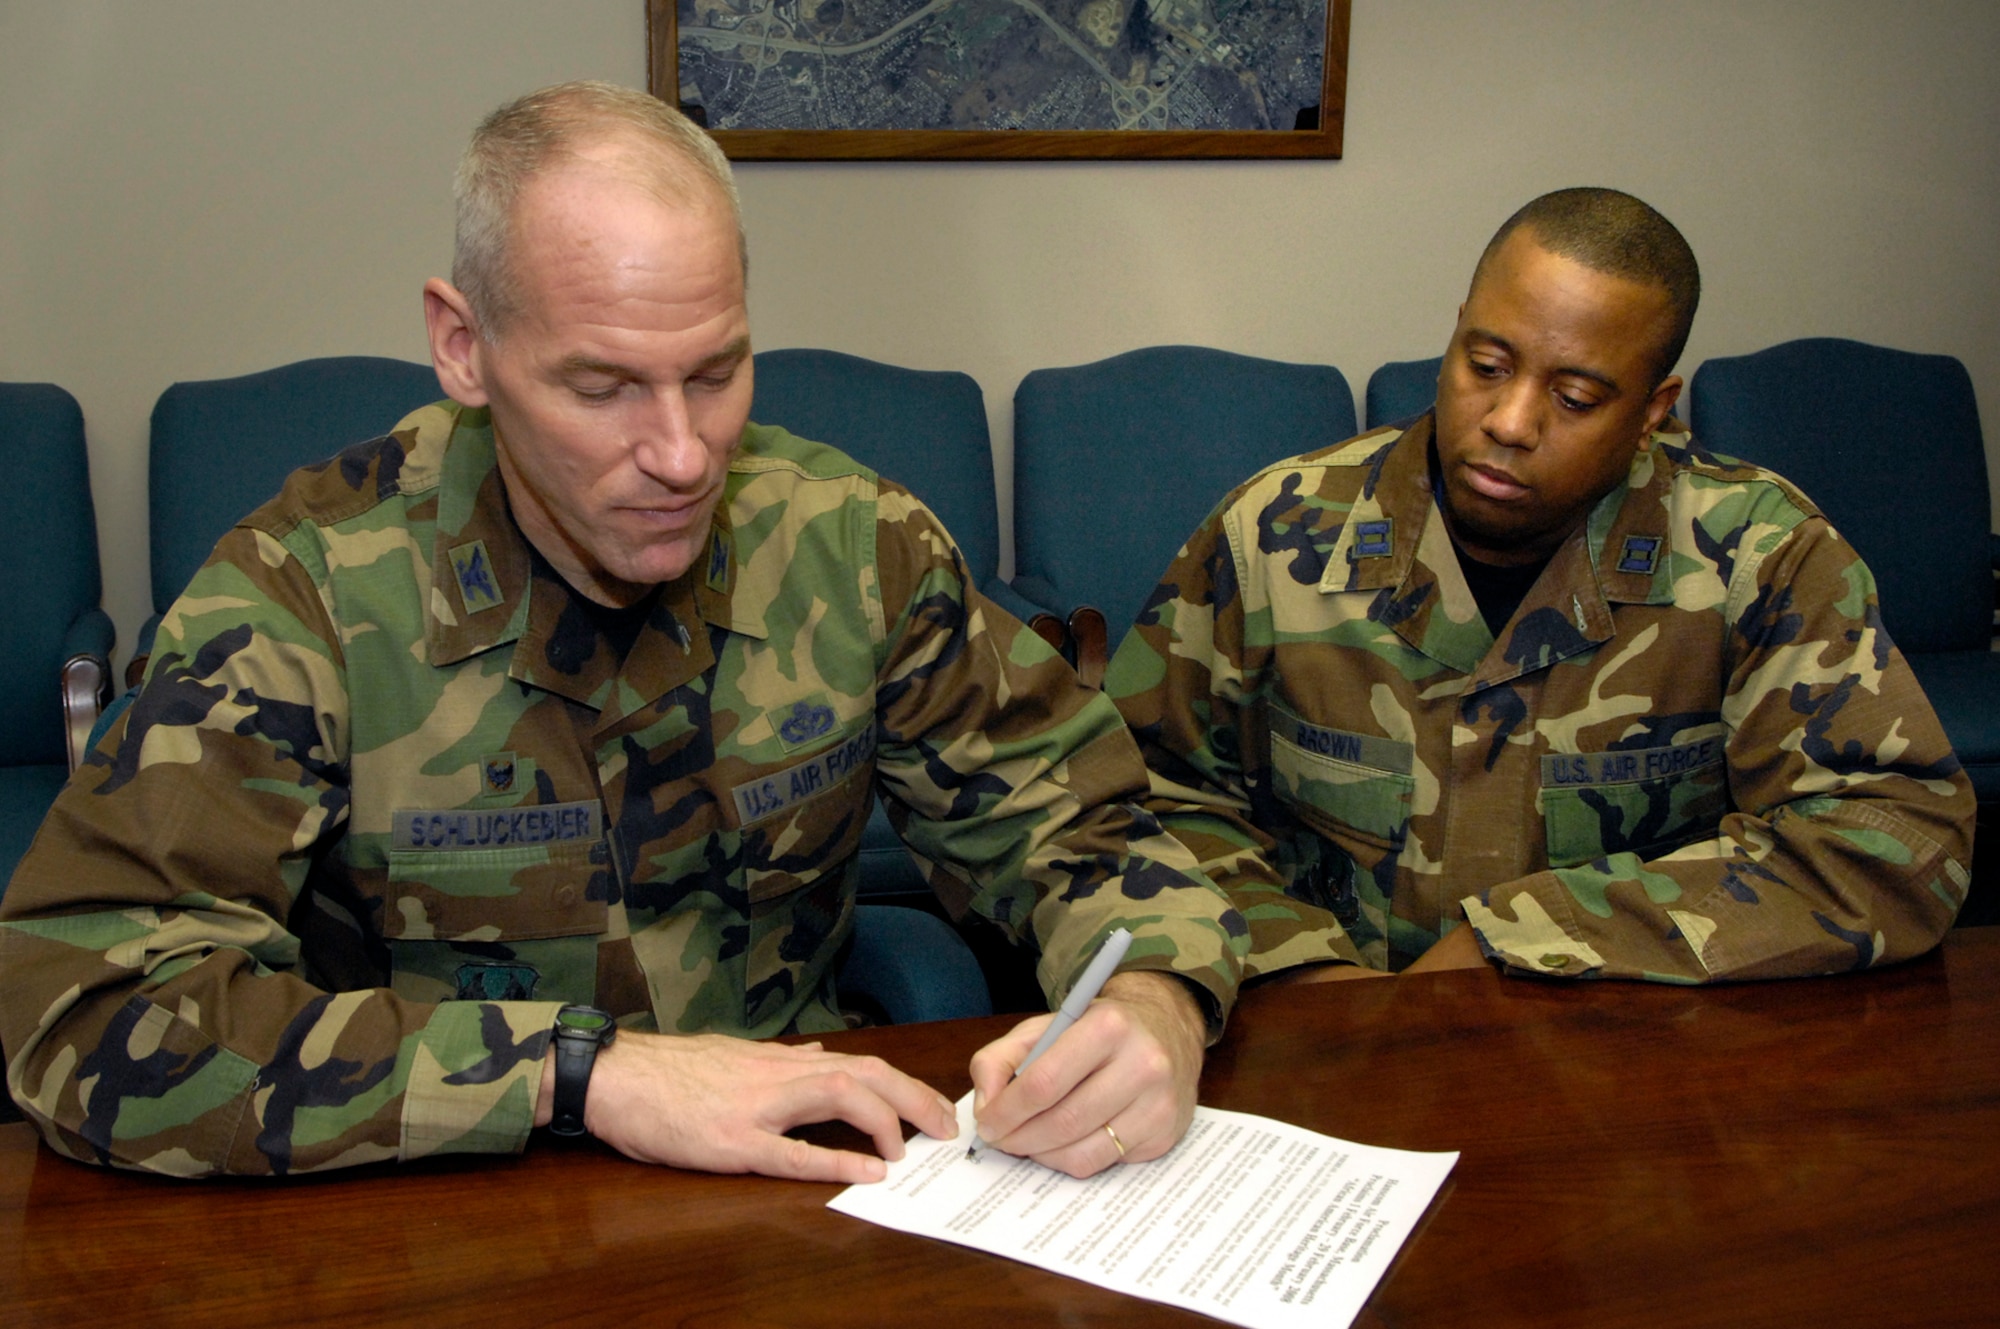 HANSCOM AFB, Mass. – Col. Tom Schluckebier (left), 66th Air Base Wing commander, signs the Black History Month proclamation while Capt. Robert Brown, 850th Electronic Systems Group looks on. Throughout February the base community is invited to attend the many events and activities planned to recognize and celebrate the achievements and contributions of black Americans. (U.S. Air Force photo by Mark Wyatt)